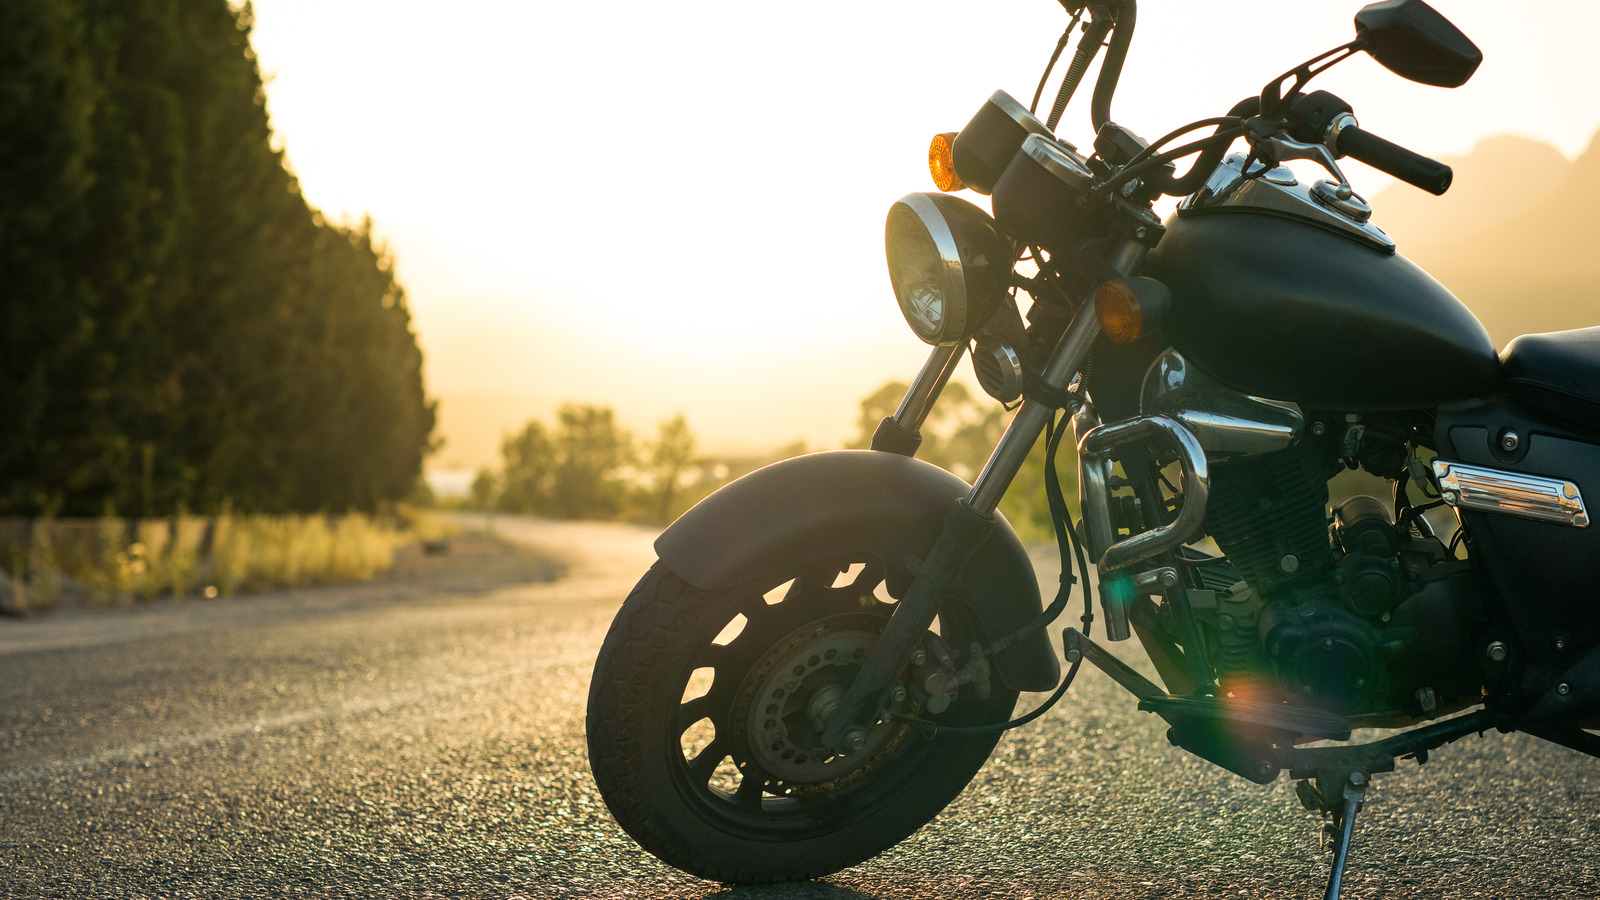 What's The Cheapest You Can Get A New Motorcycle For?